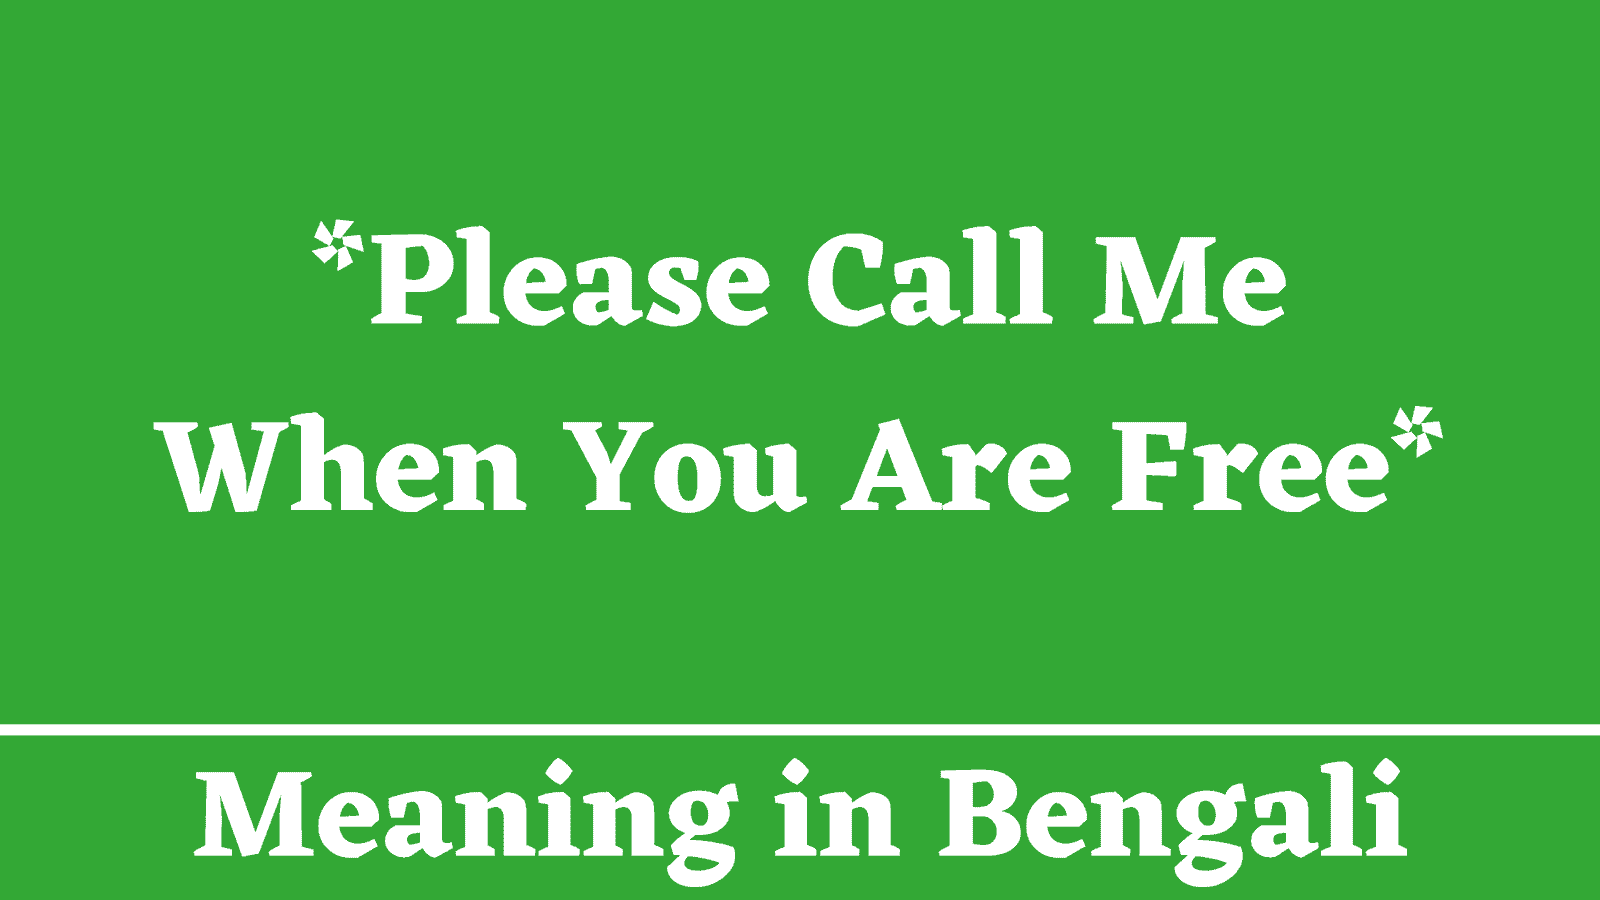 Please Call Me When You Are Free Meaning in Bengali